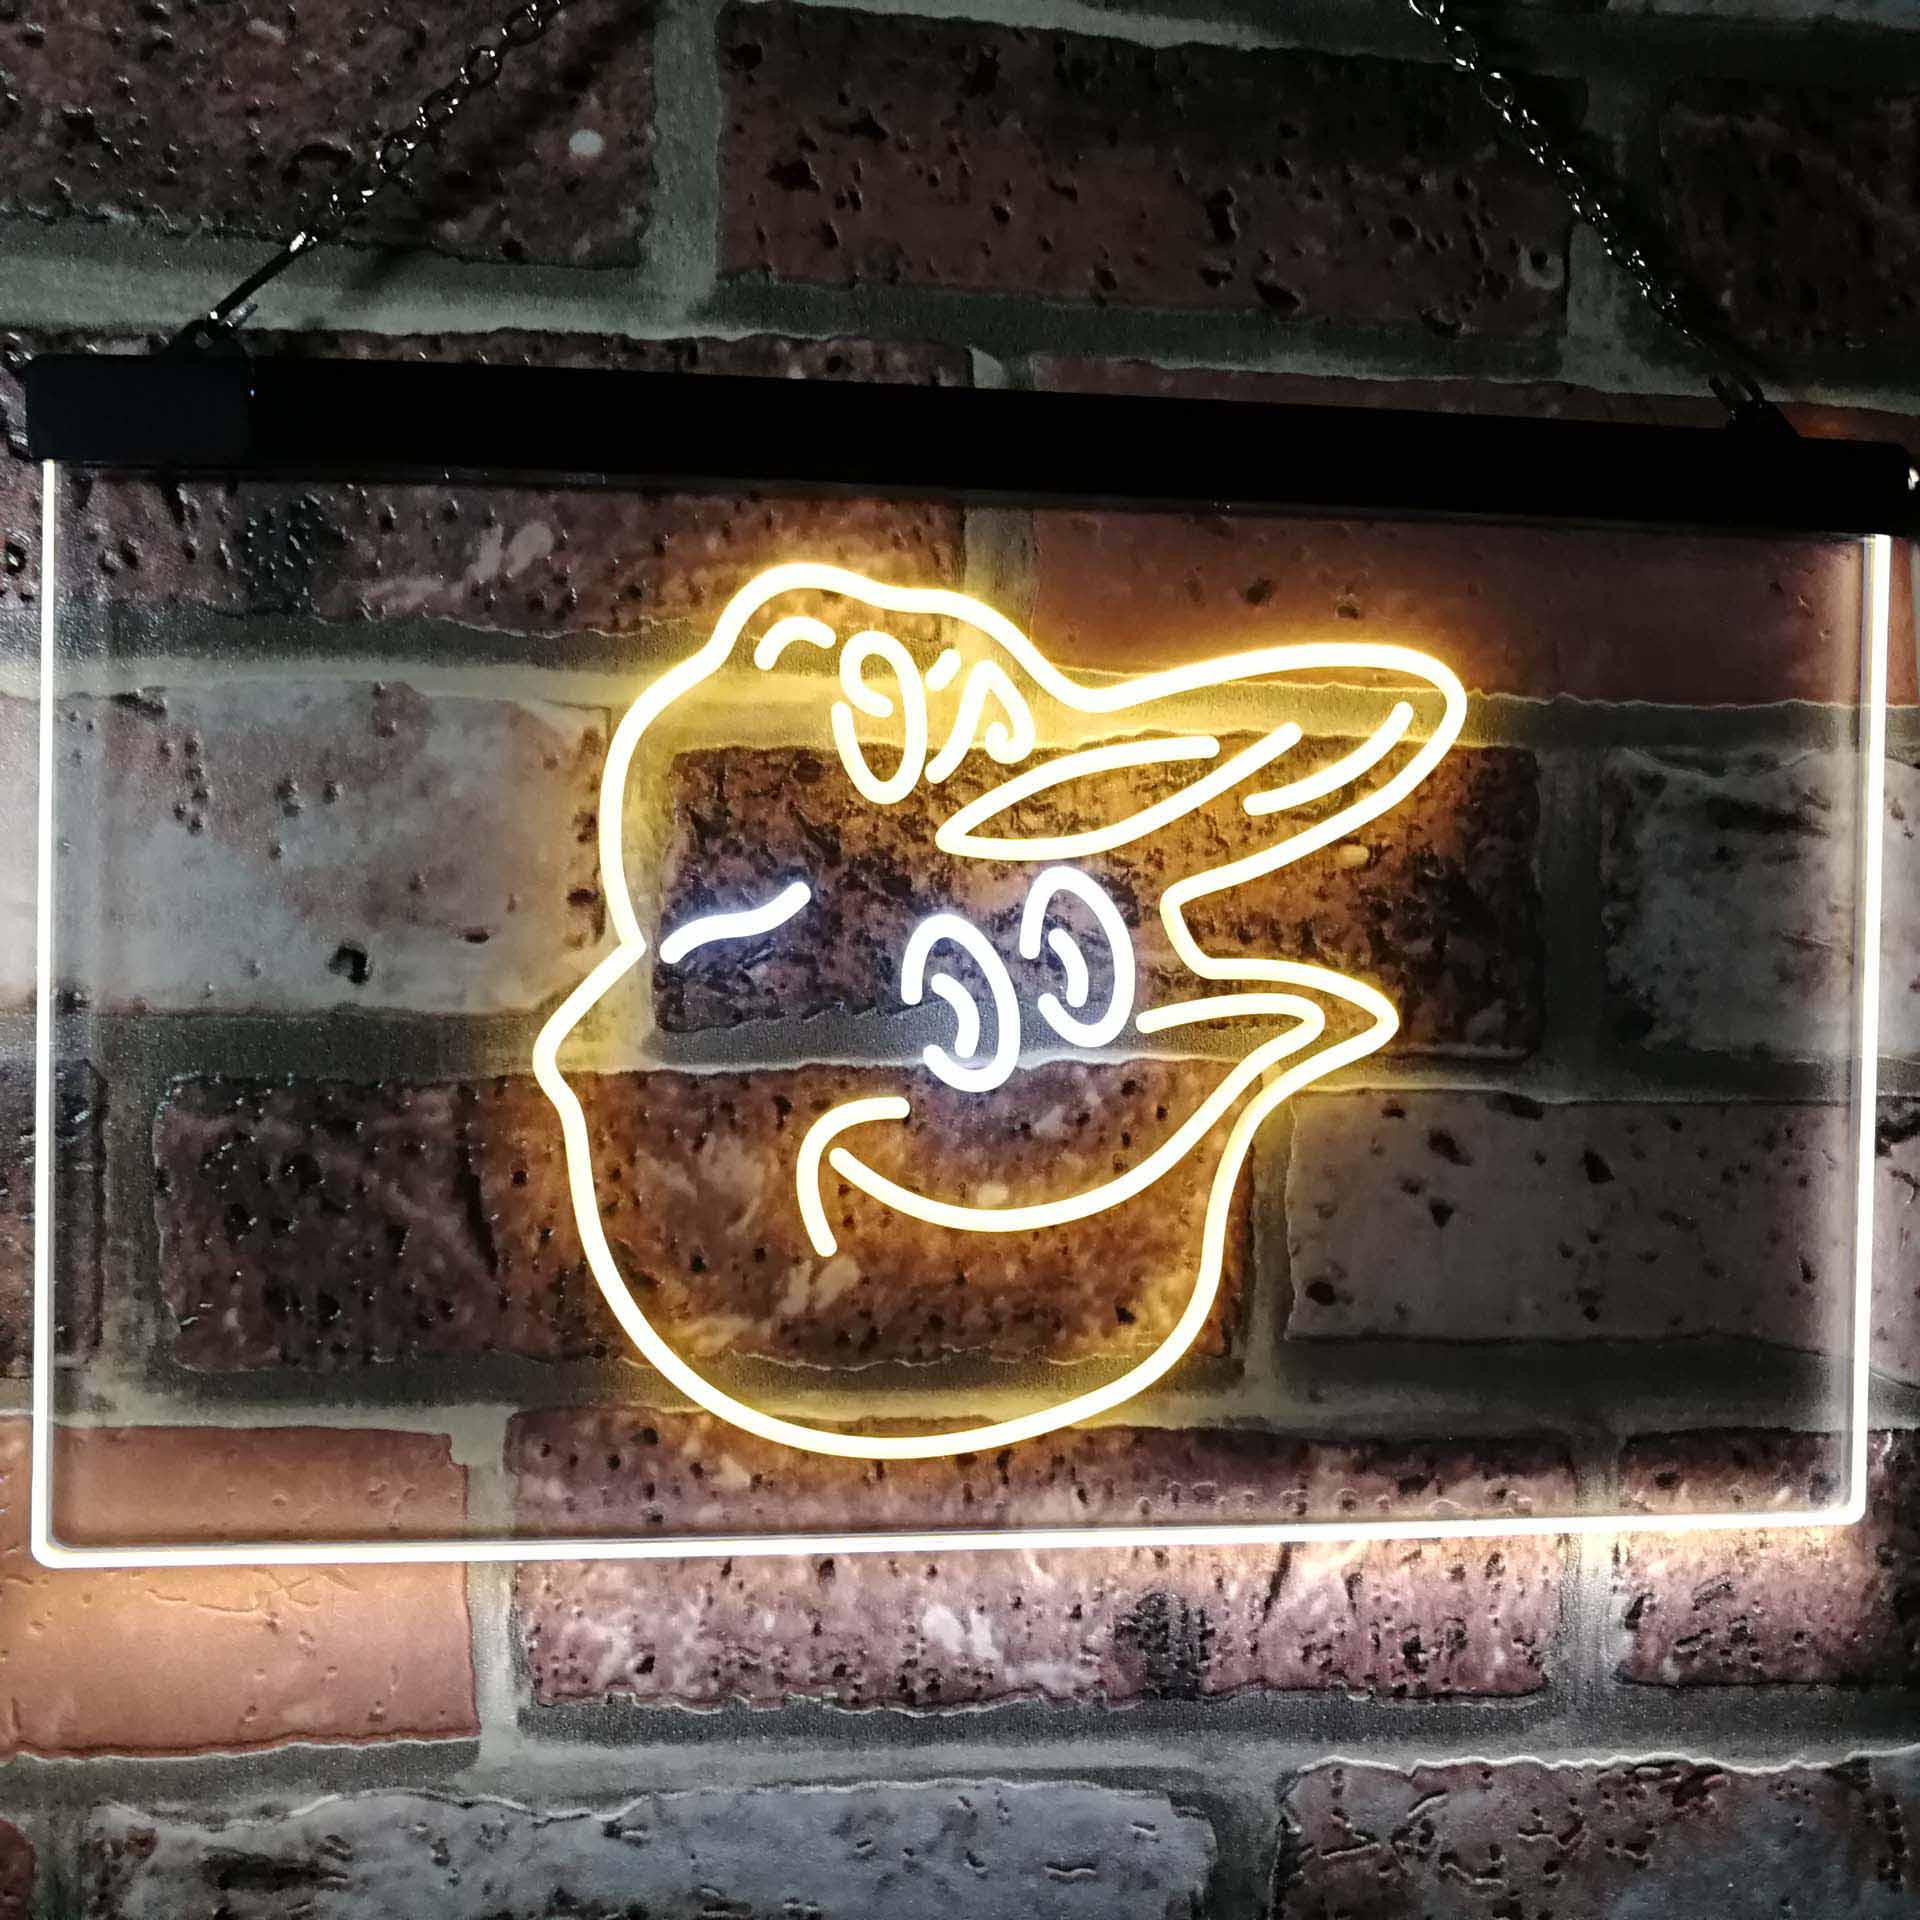 Baltimore Orioles LED Neon Sign